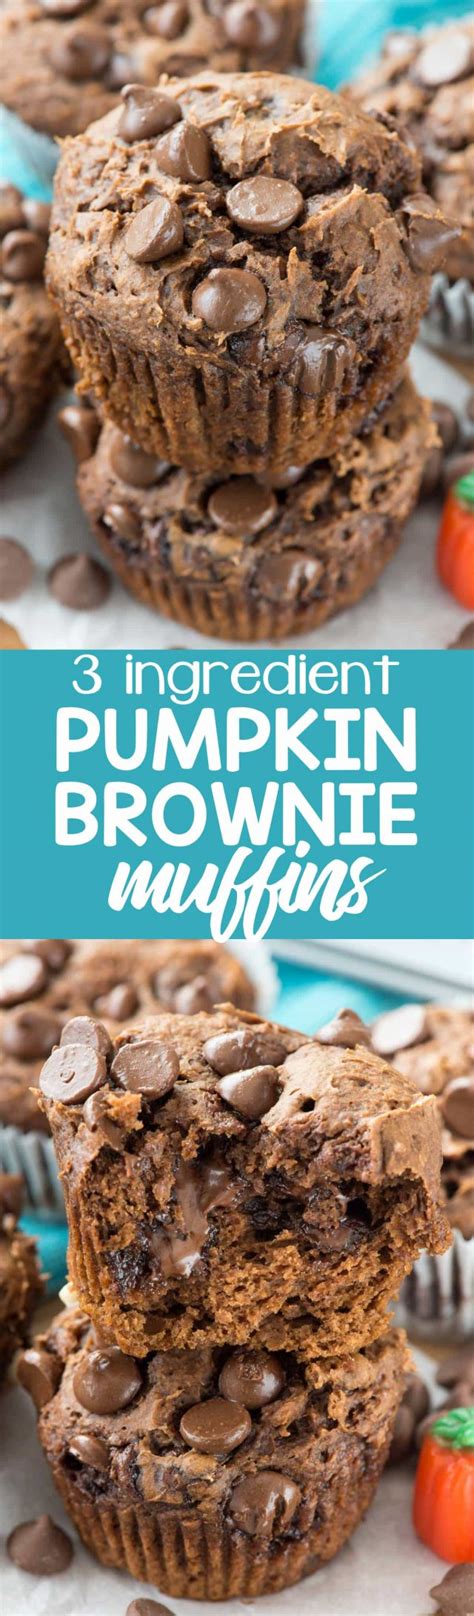 Pie pumpkins, eating pumpkins and winter squashes come in a huge variety of shapes, colors, sizes, textures and flavors. 3 Ingredient Pumpkin Brownie Muffins - Crazy for Crust